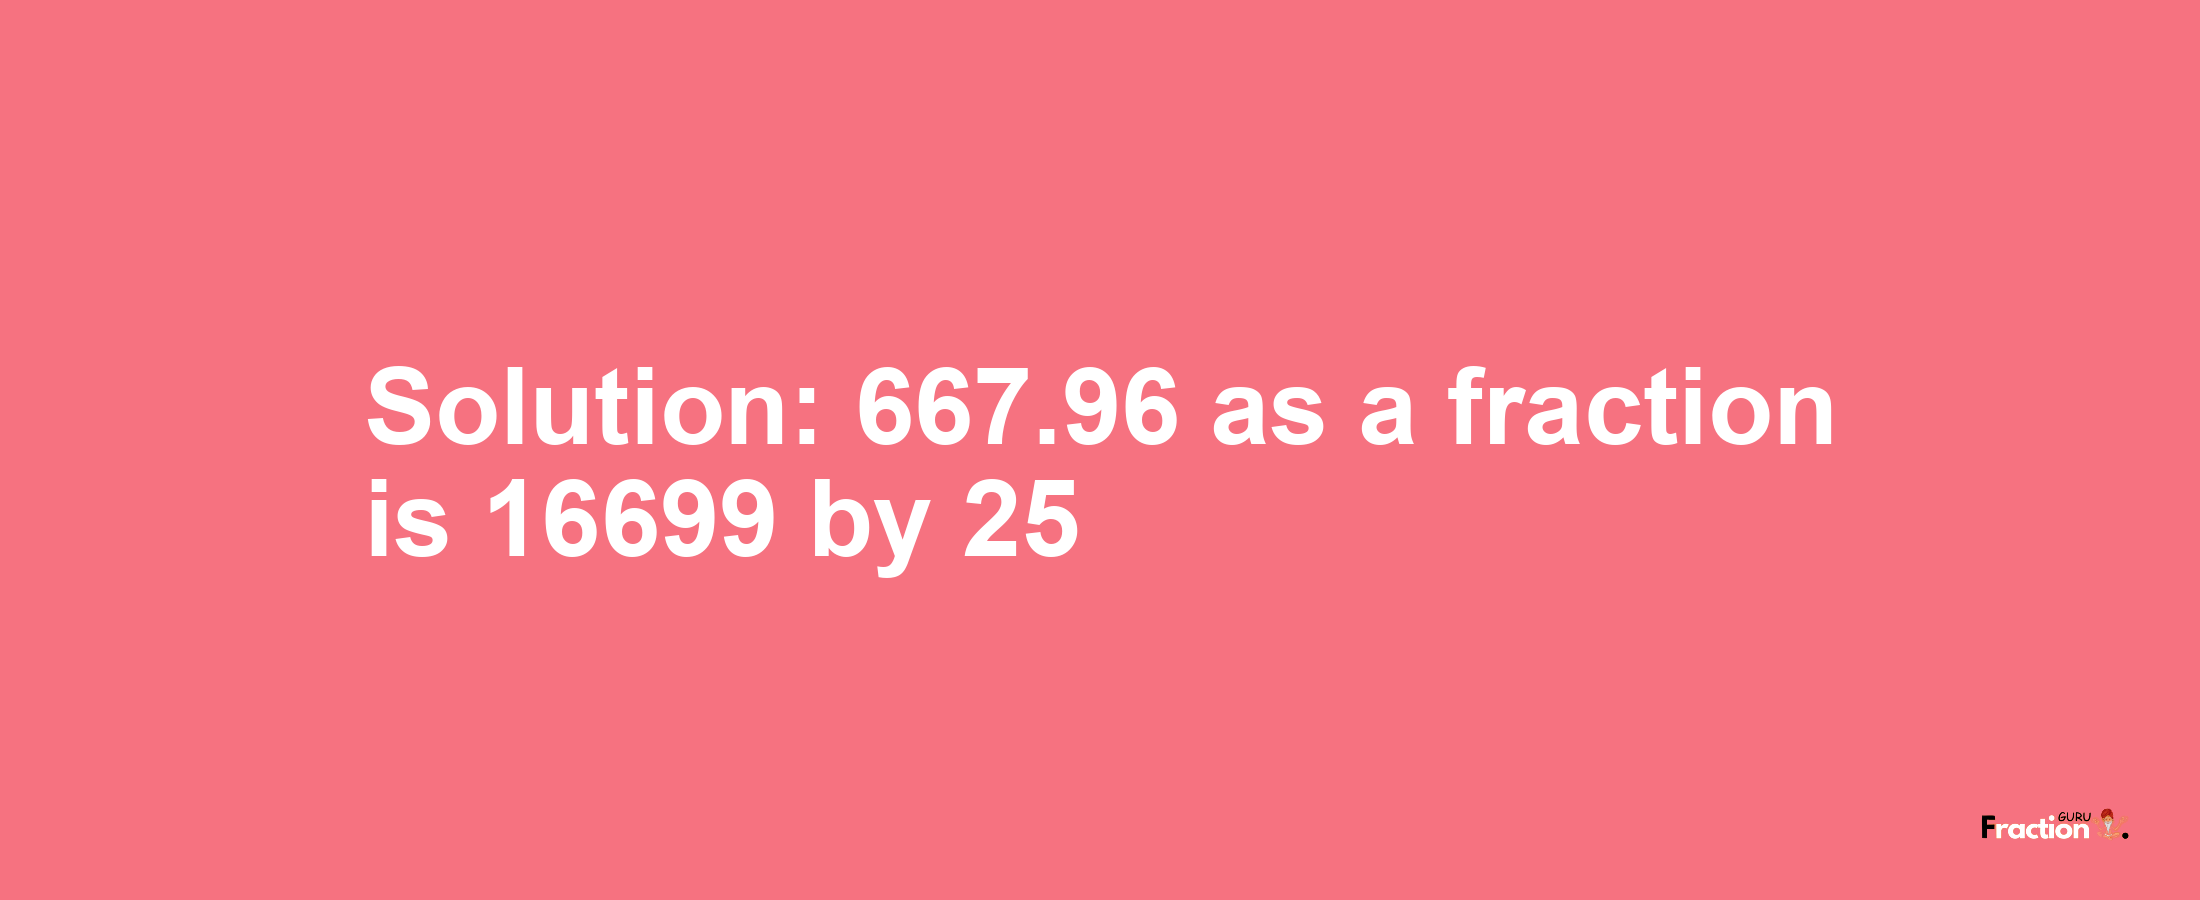 Solution:667.96 as a fraction is 16699/25